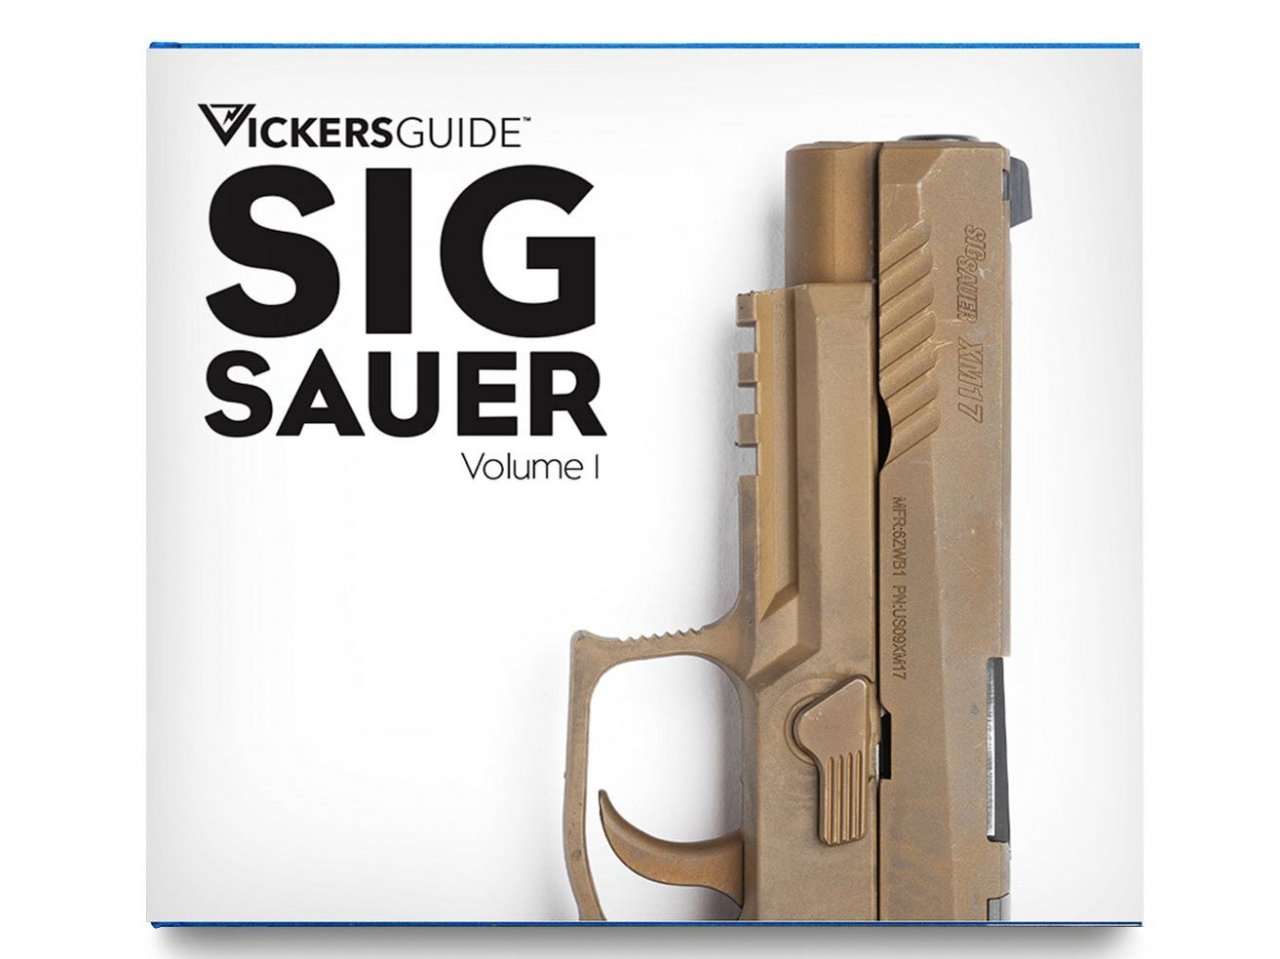 VICKERS GUIDE: SIG Sauer Volume 1